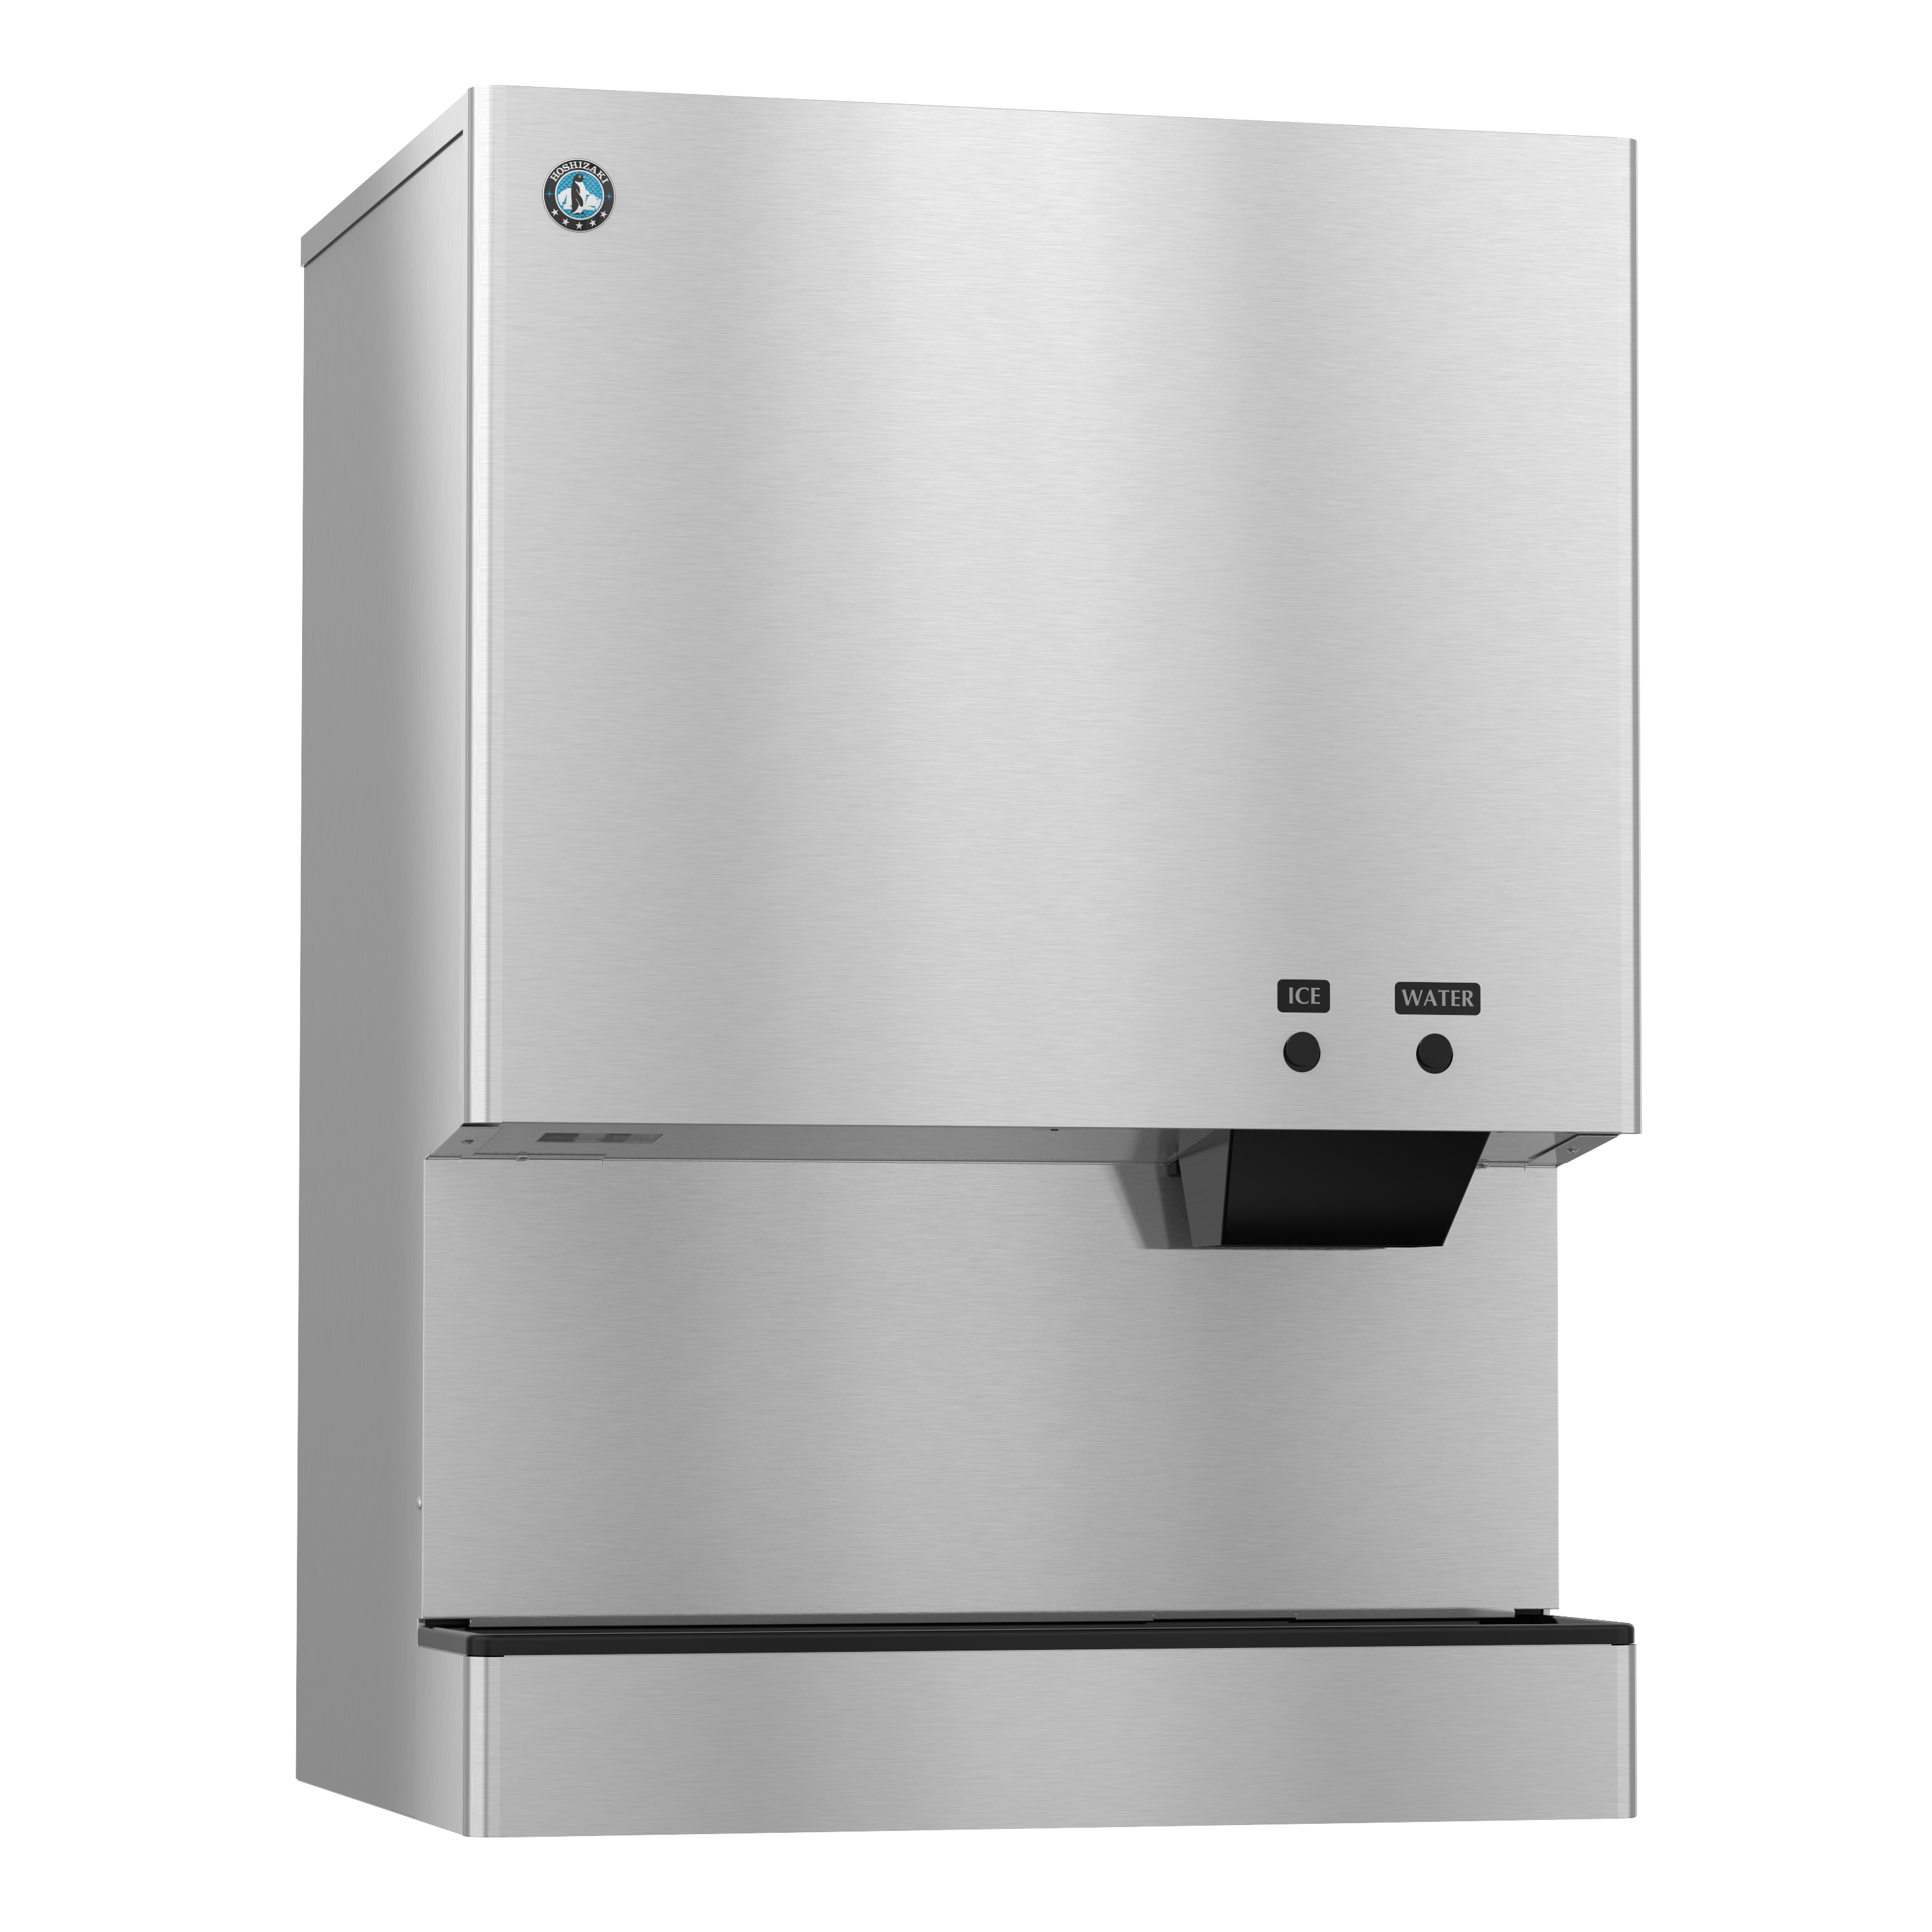 DCM-751BWH, Cubelet Icemaker, Water-cooled, Built in Storage Bin